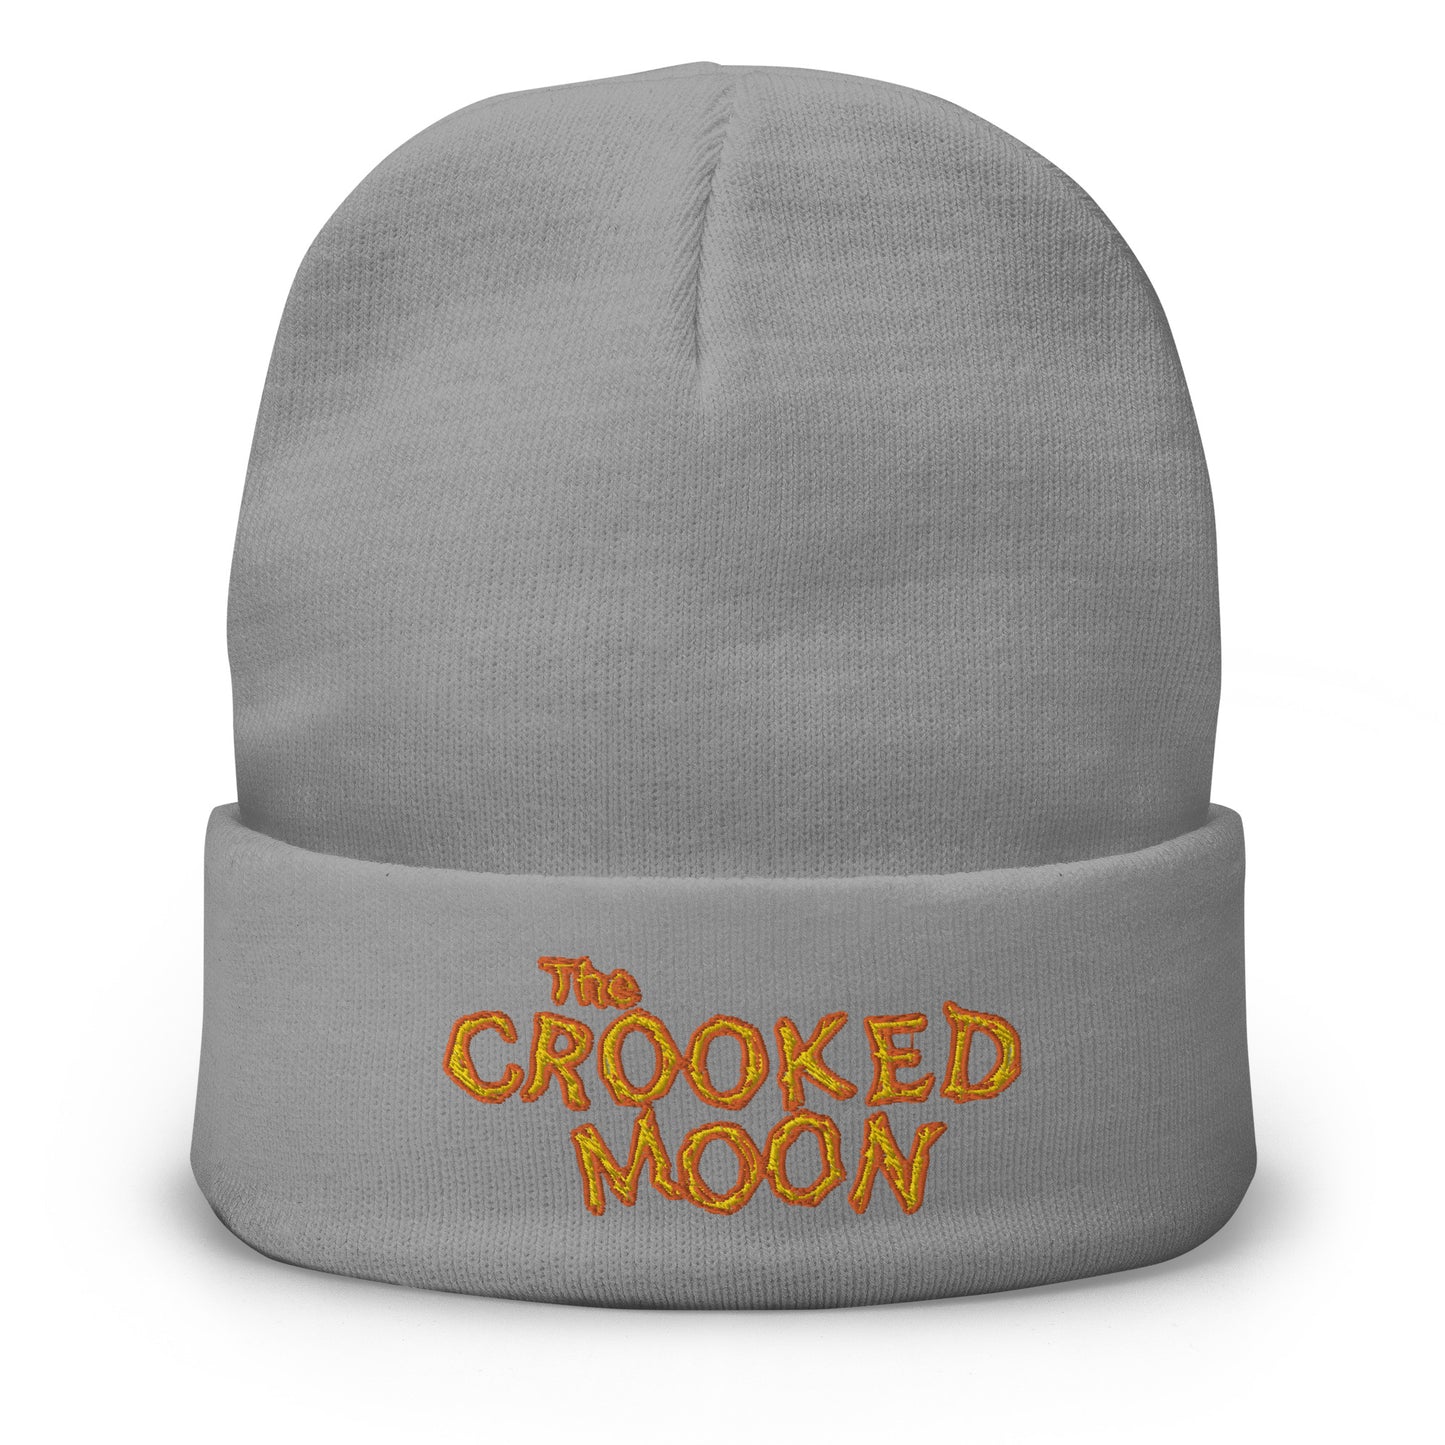 The Crooked Moon - Beanie